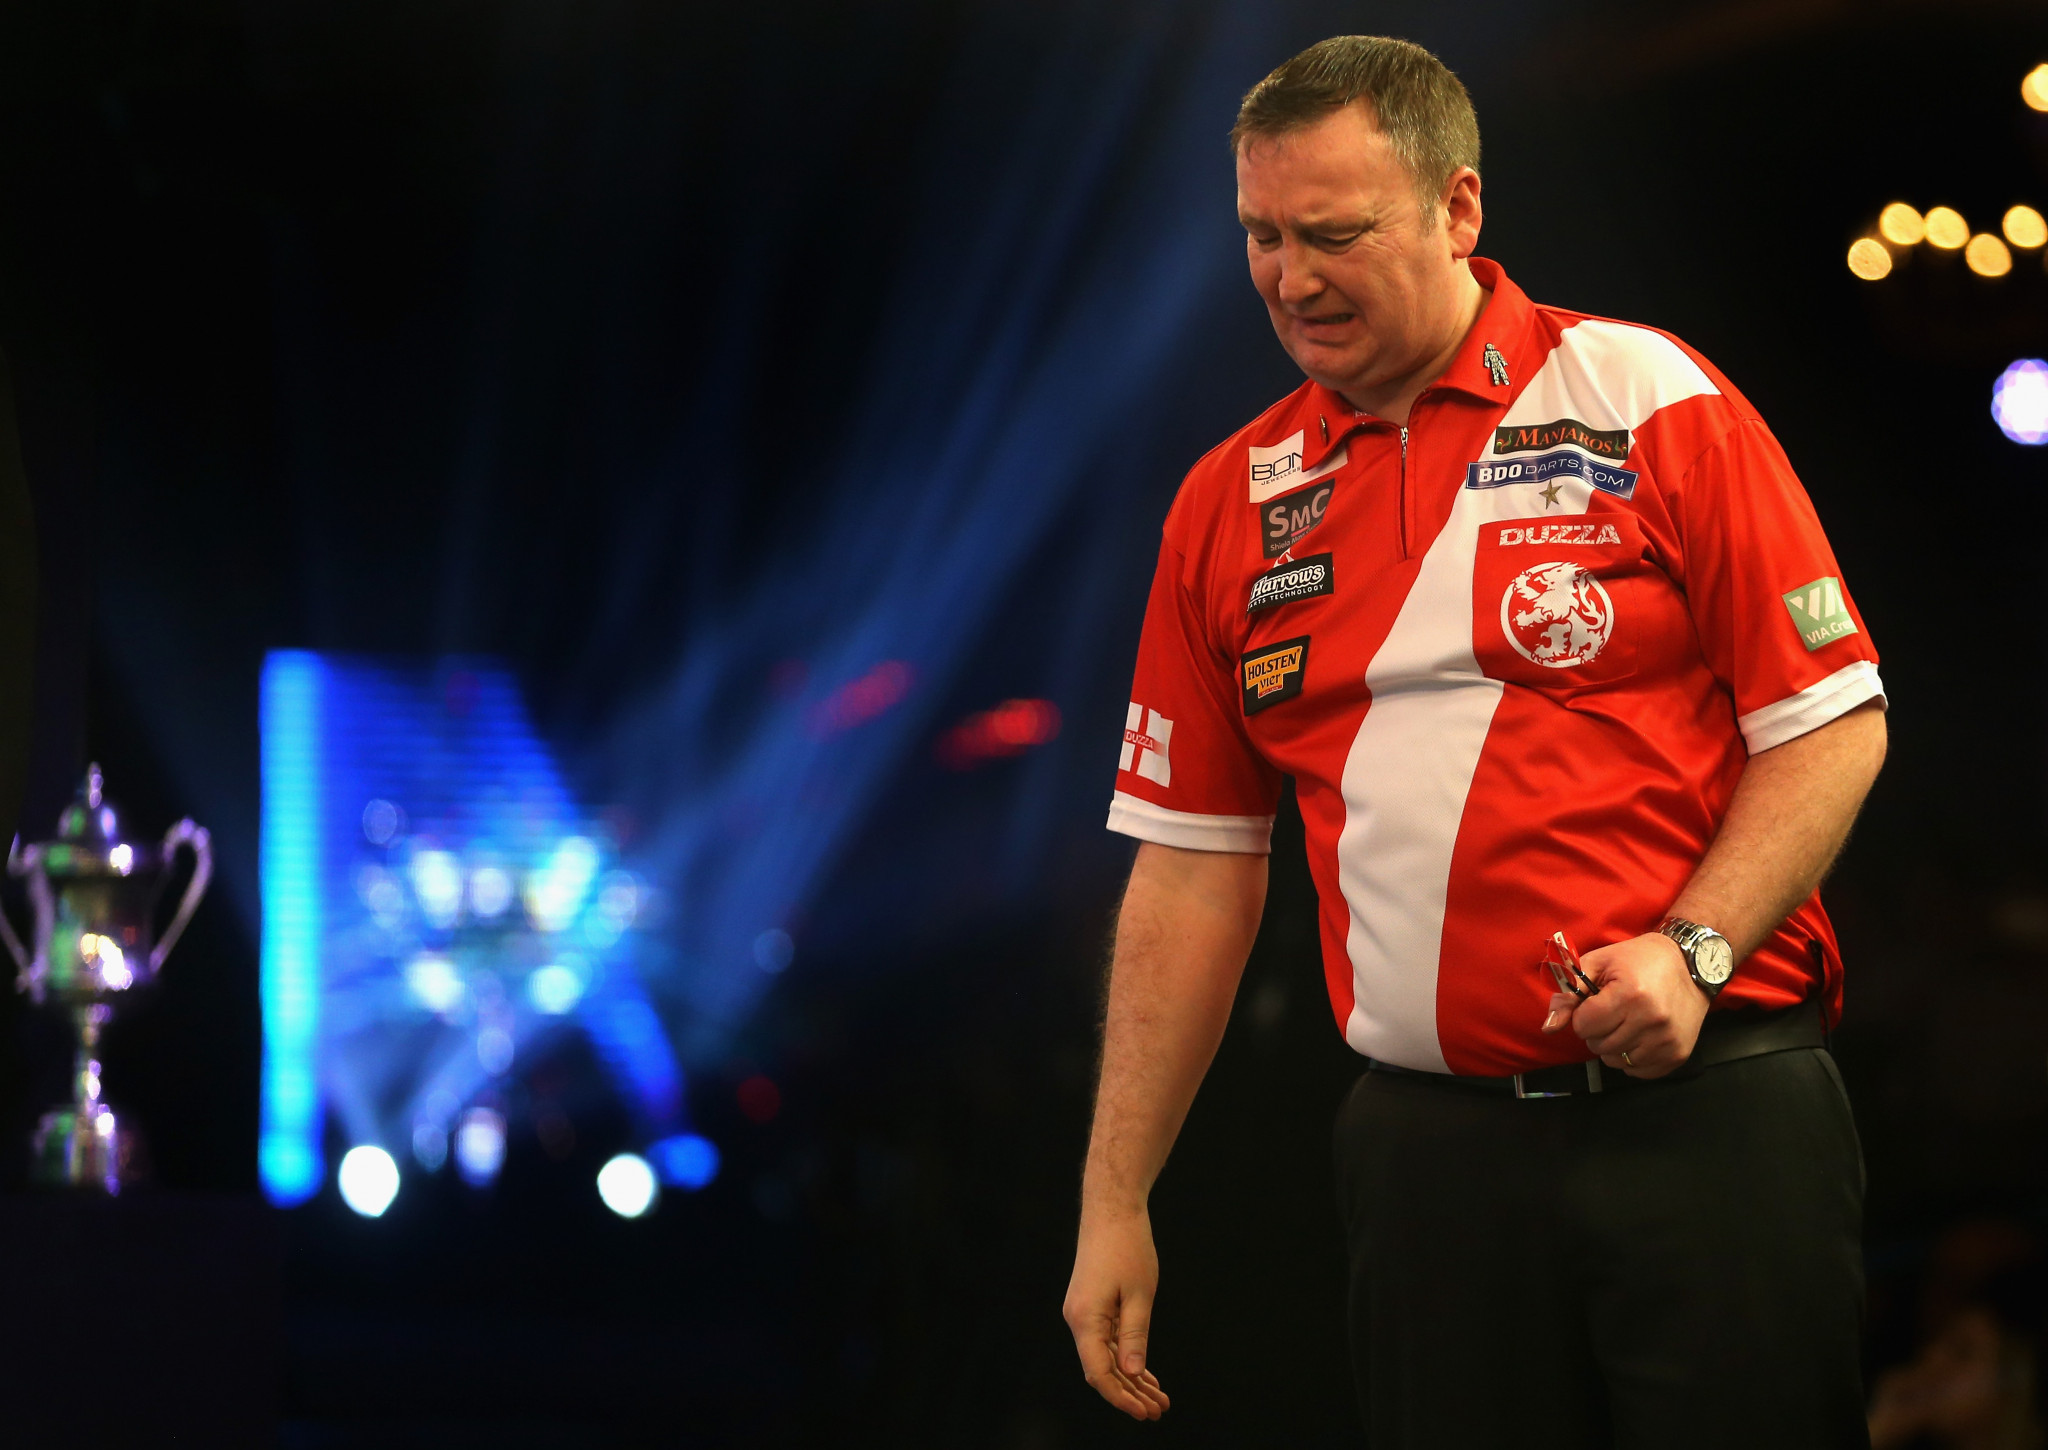 Back-to-back winner Durrant survives scare to reach BDO Darts World Championship last eight